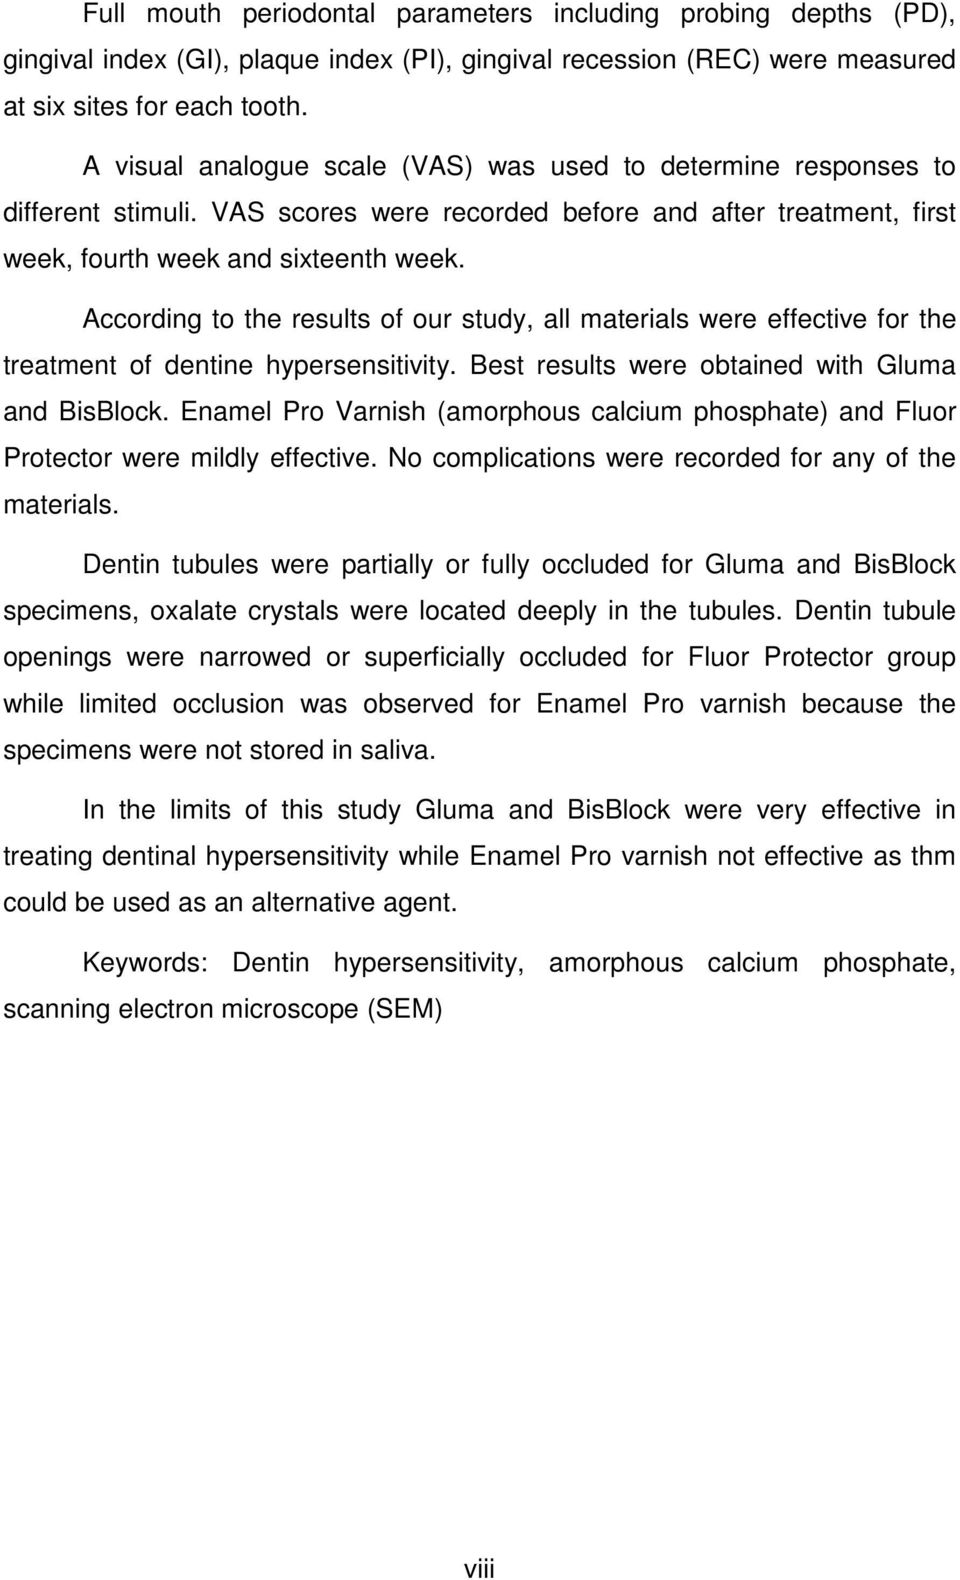 According to the results of our study, all materials were effective for the treatment of dentine hypersensitivity. Best results were obtained with Gluma and BisBlock.